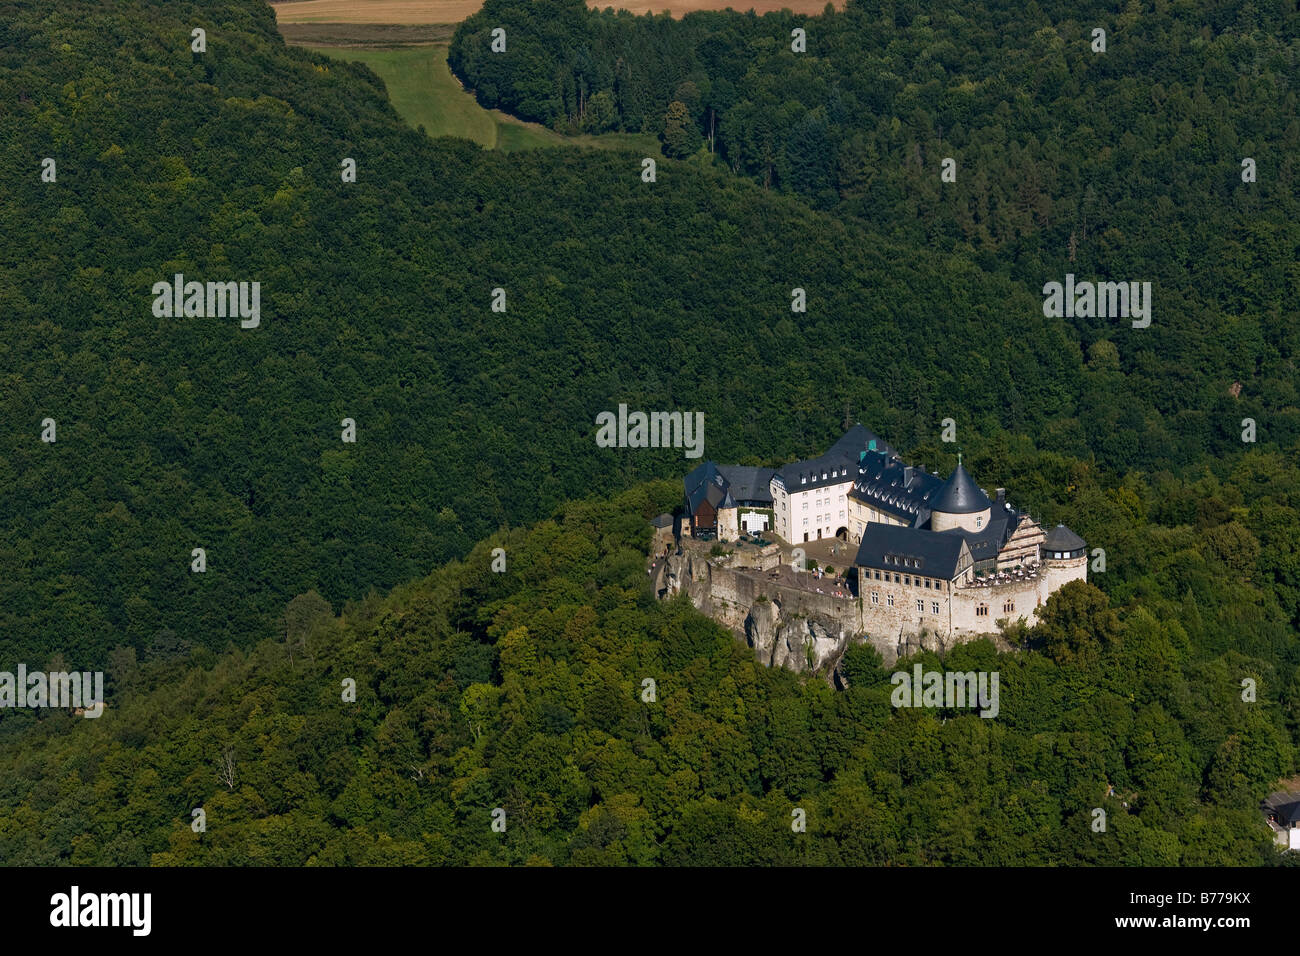 Aerial photograph, Waldeck castle, Hesse, Germany, Europe Stock Photo